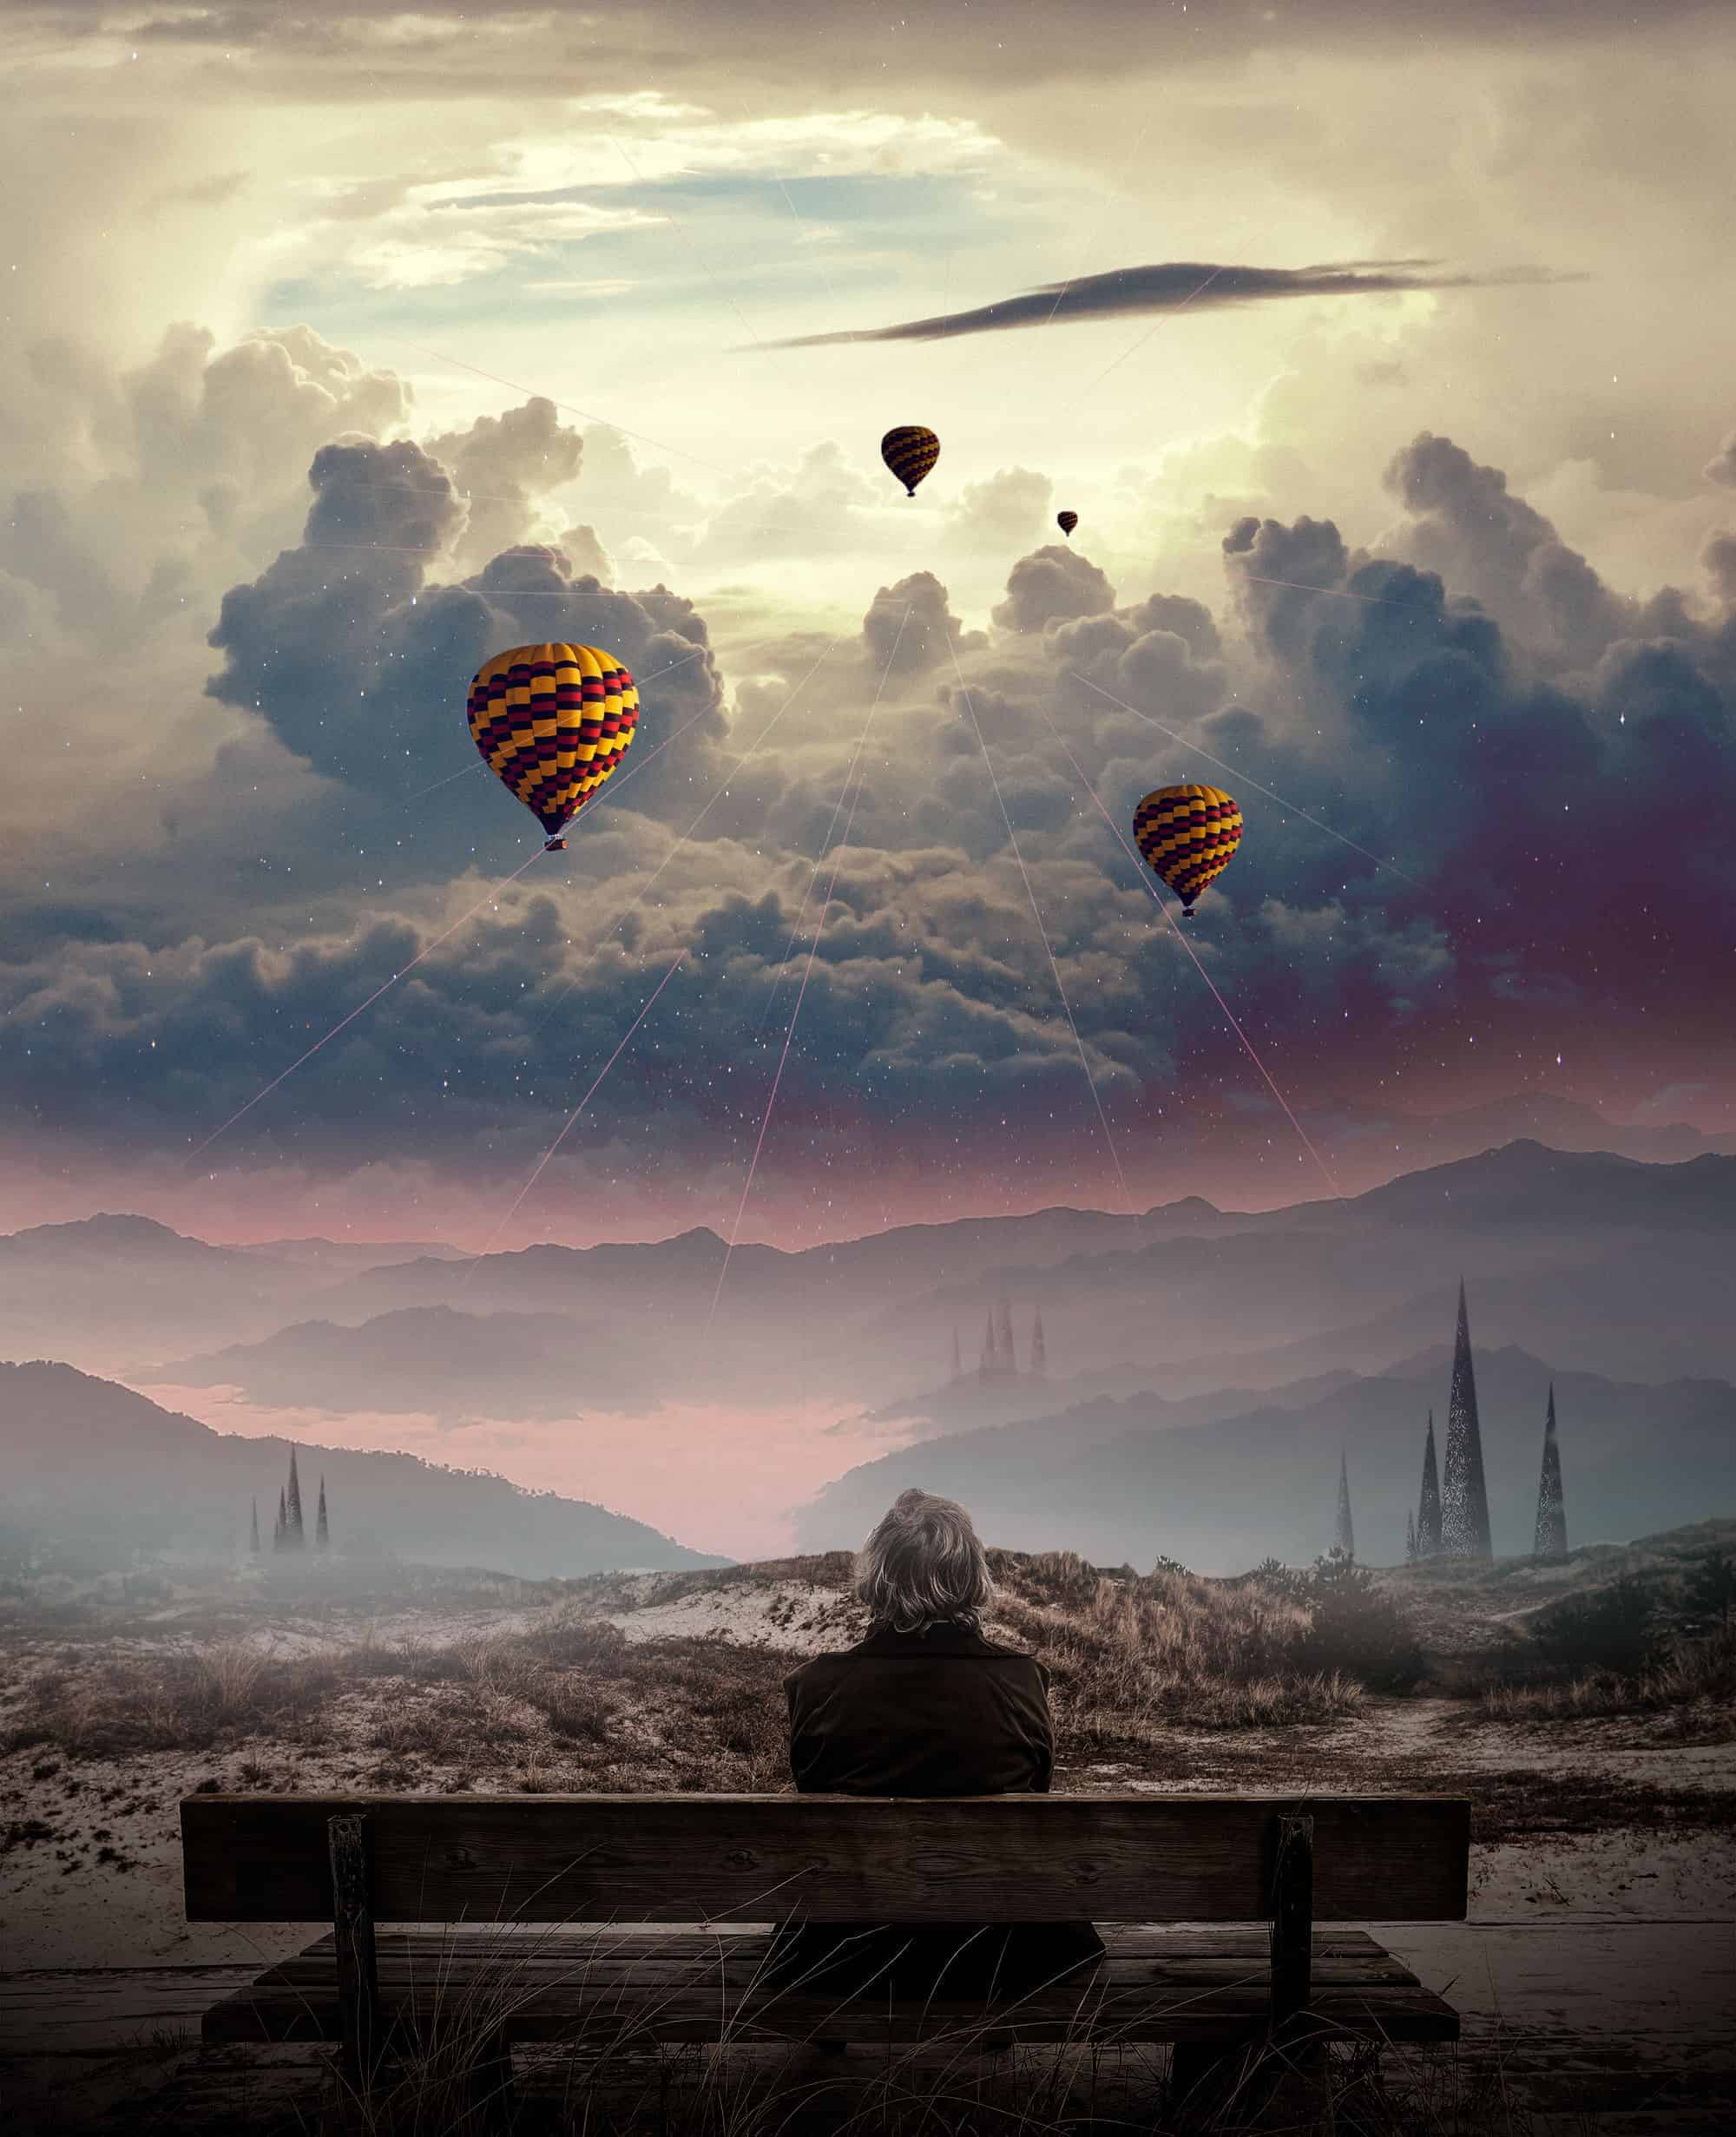 Create a Surreal Photo Manipulation of a Man Watching a Magical Sky